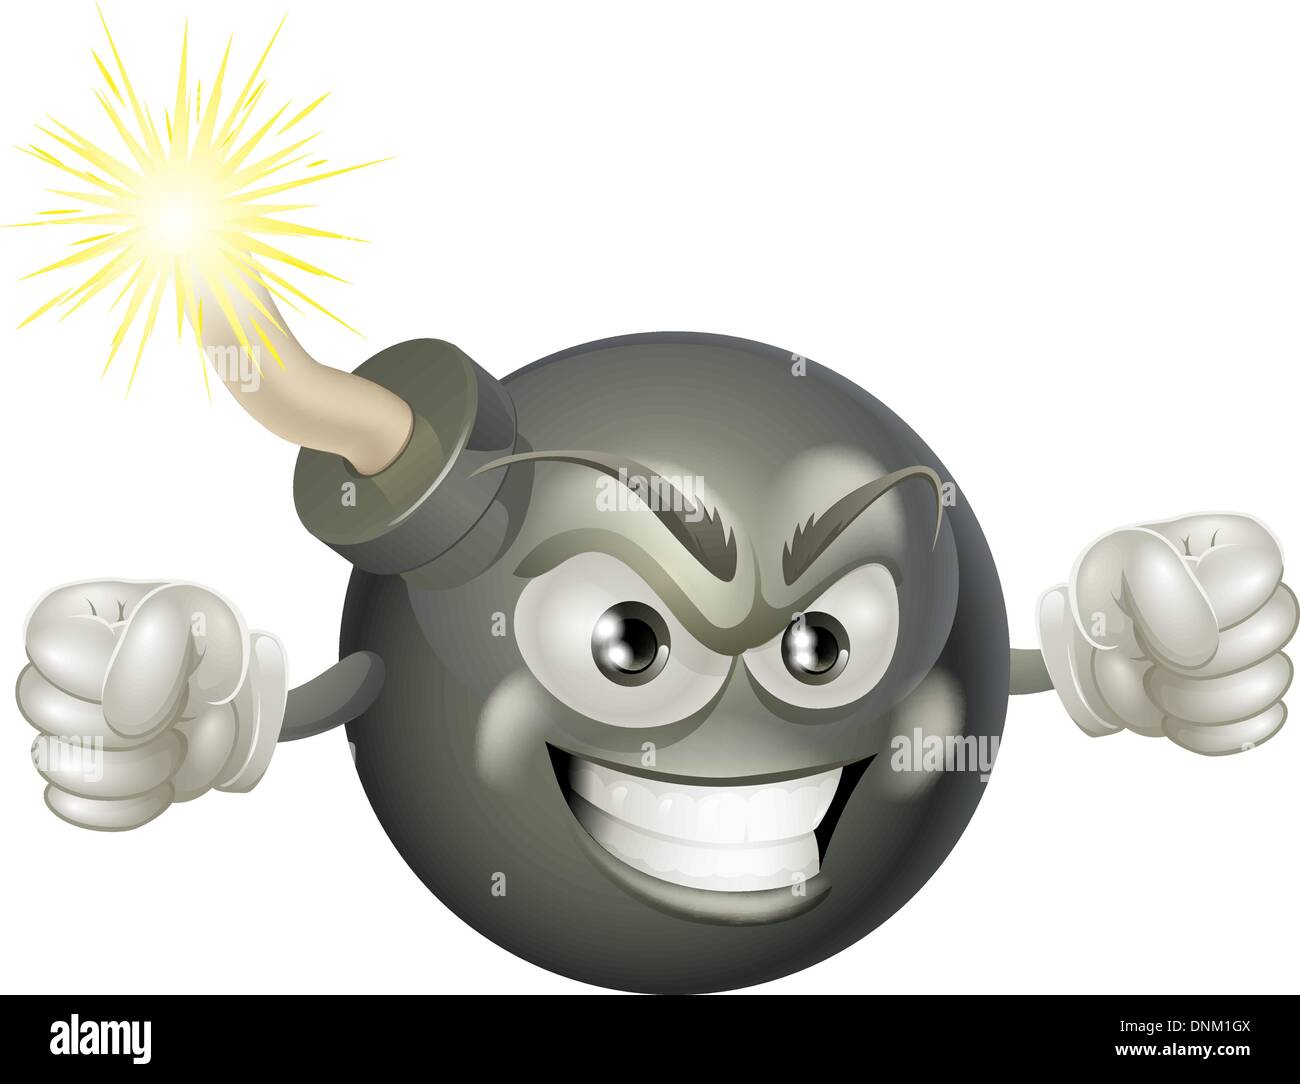 An illustration of mean or angry looking cartoon bomb character with a lit fuse Stock Vector